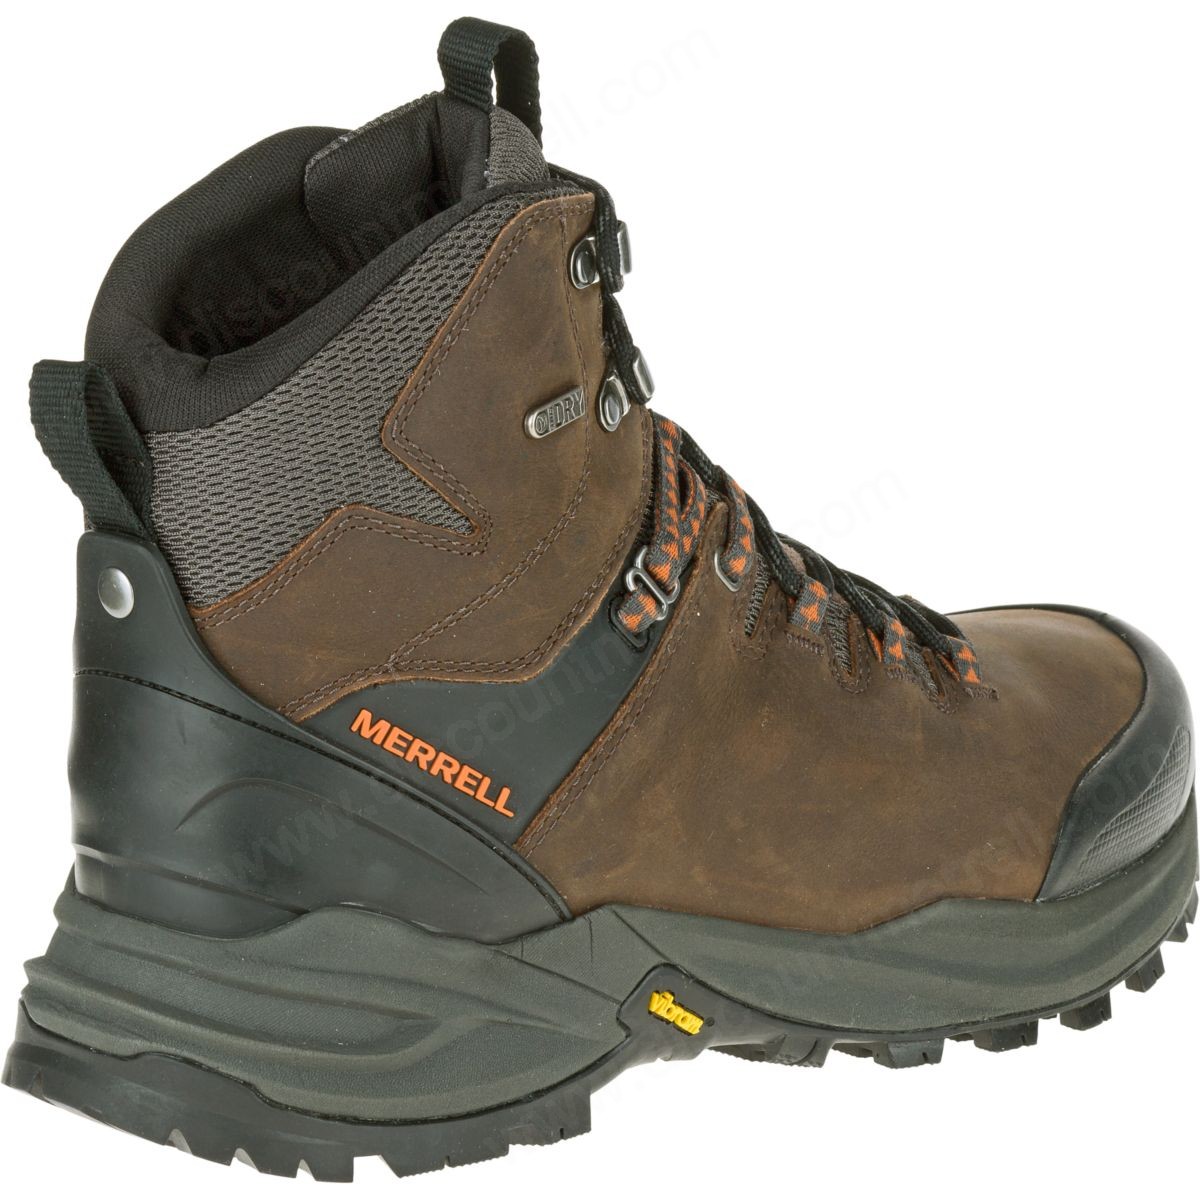 Merrell Man's Phaserbound Waterproof Clay - -7